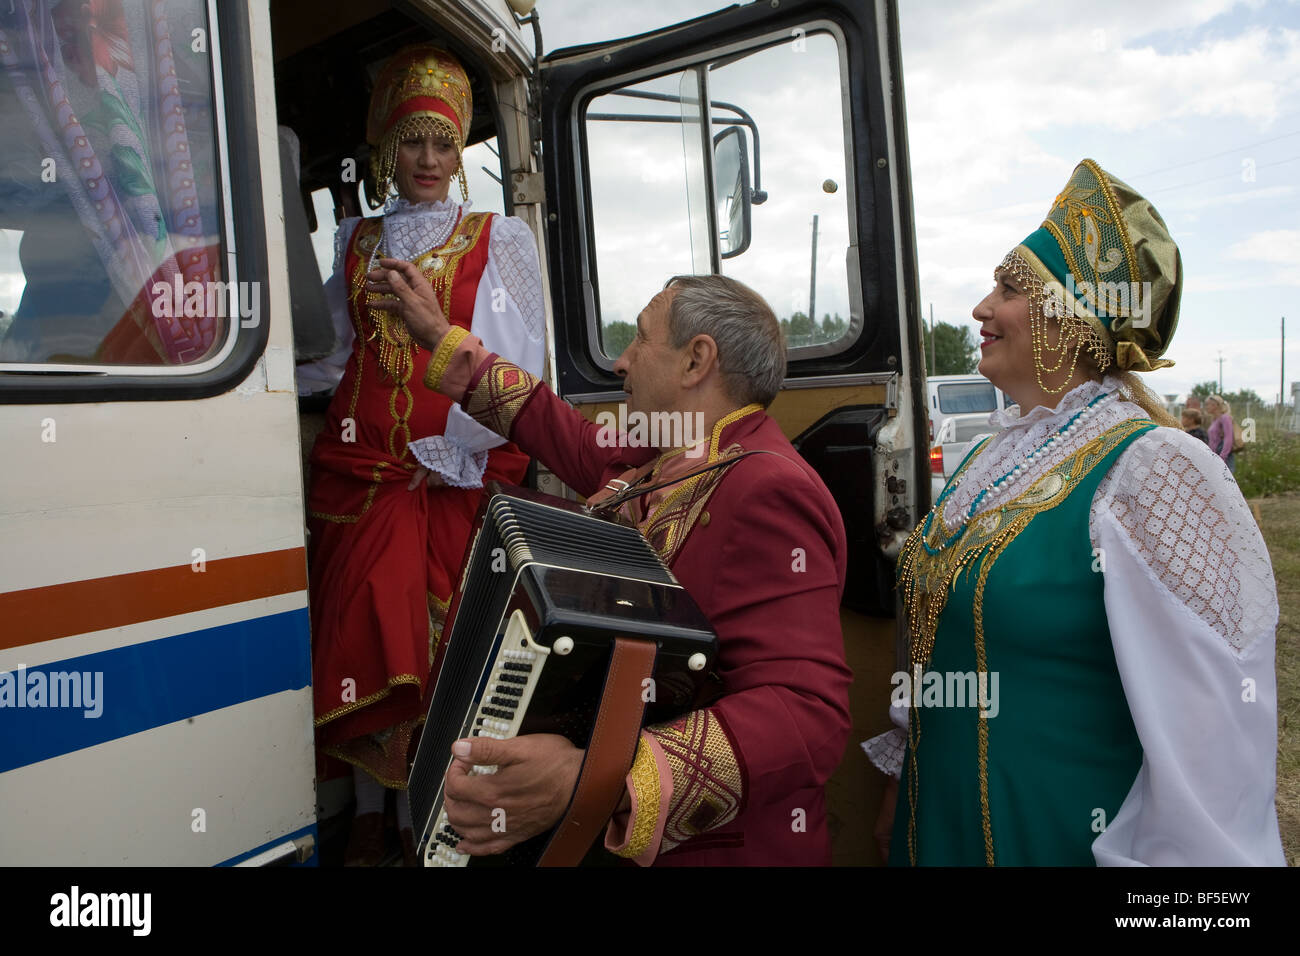 Traditional Russian dancers and accordionist by coach at horse racing event, Urals, Russia Stock Photo